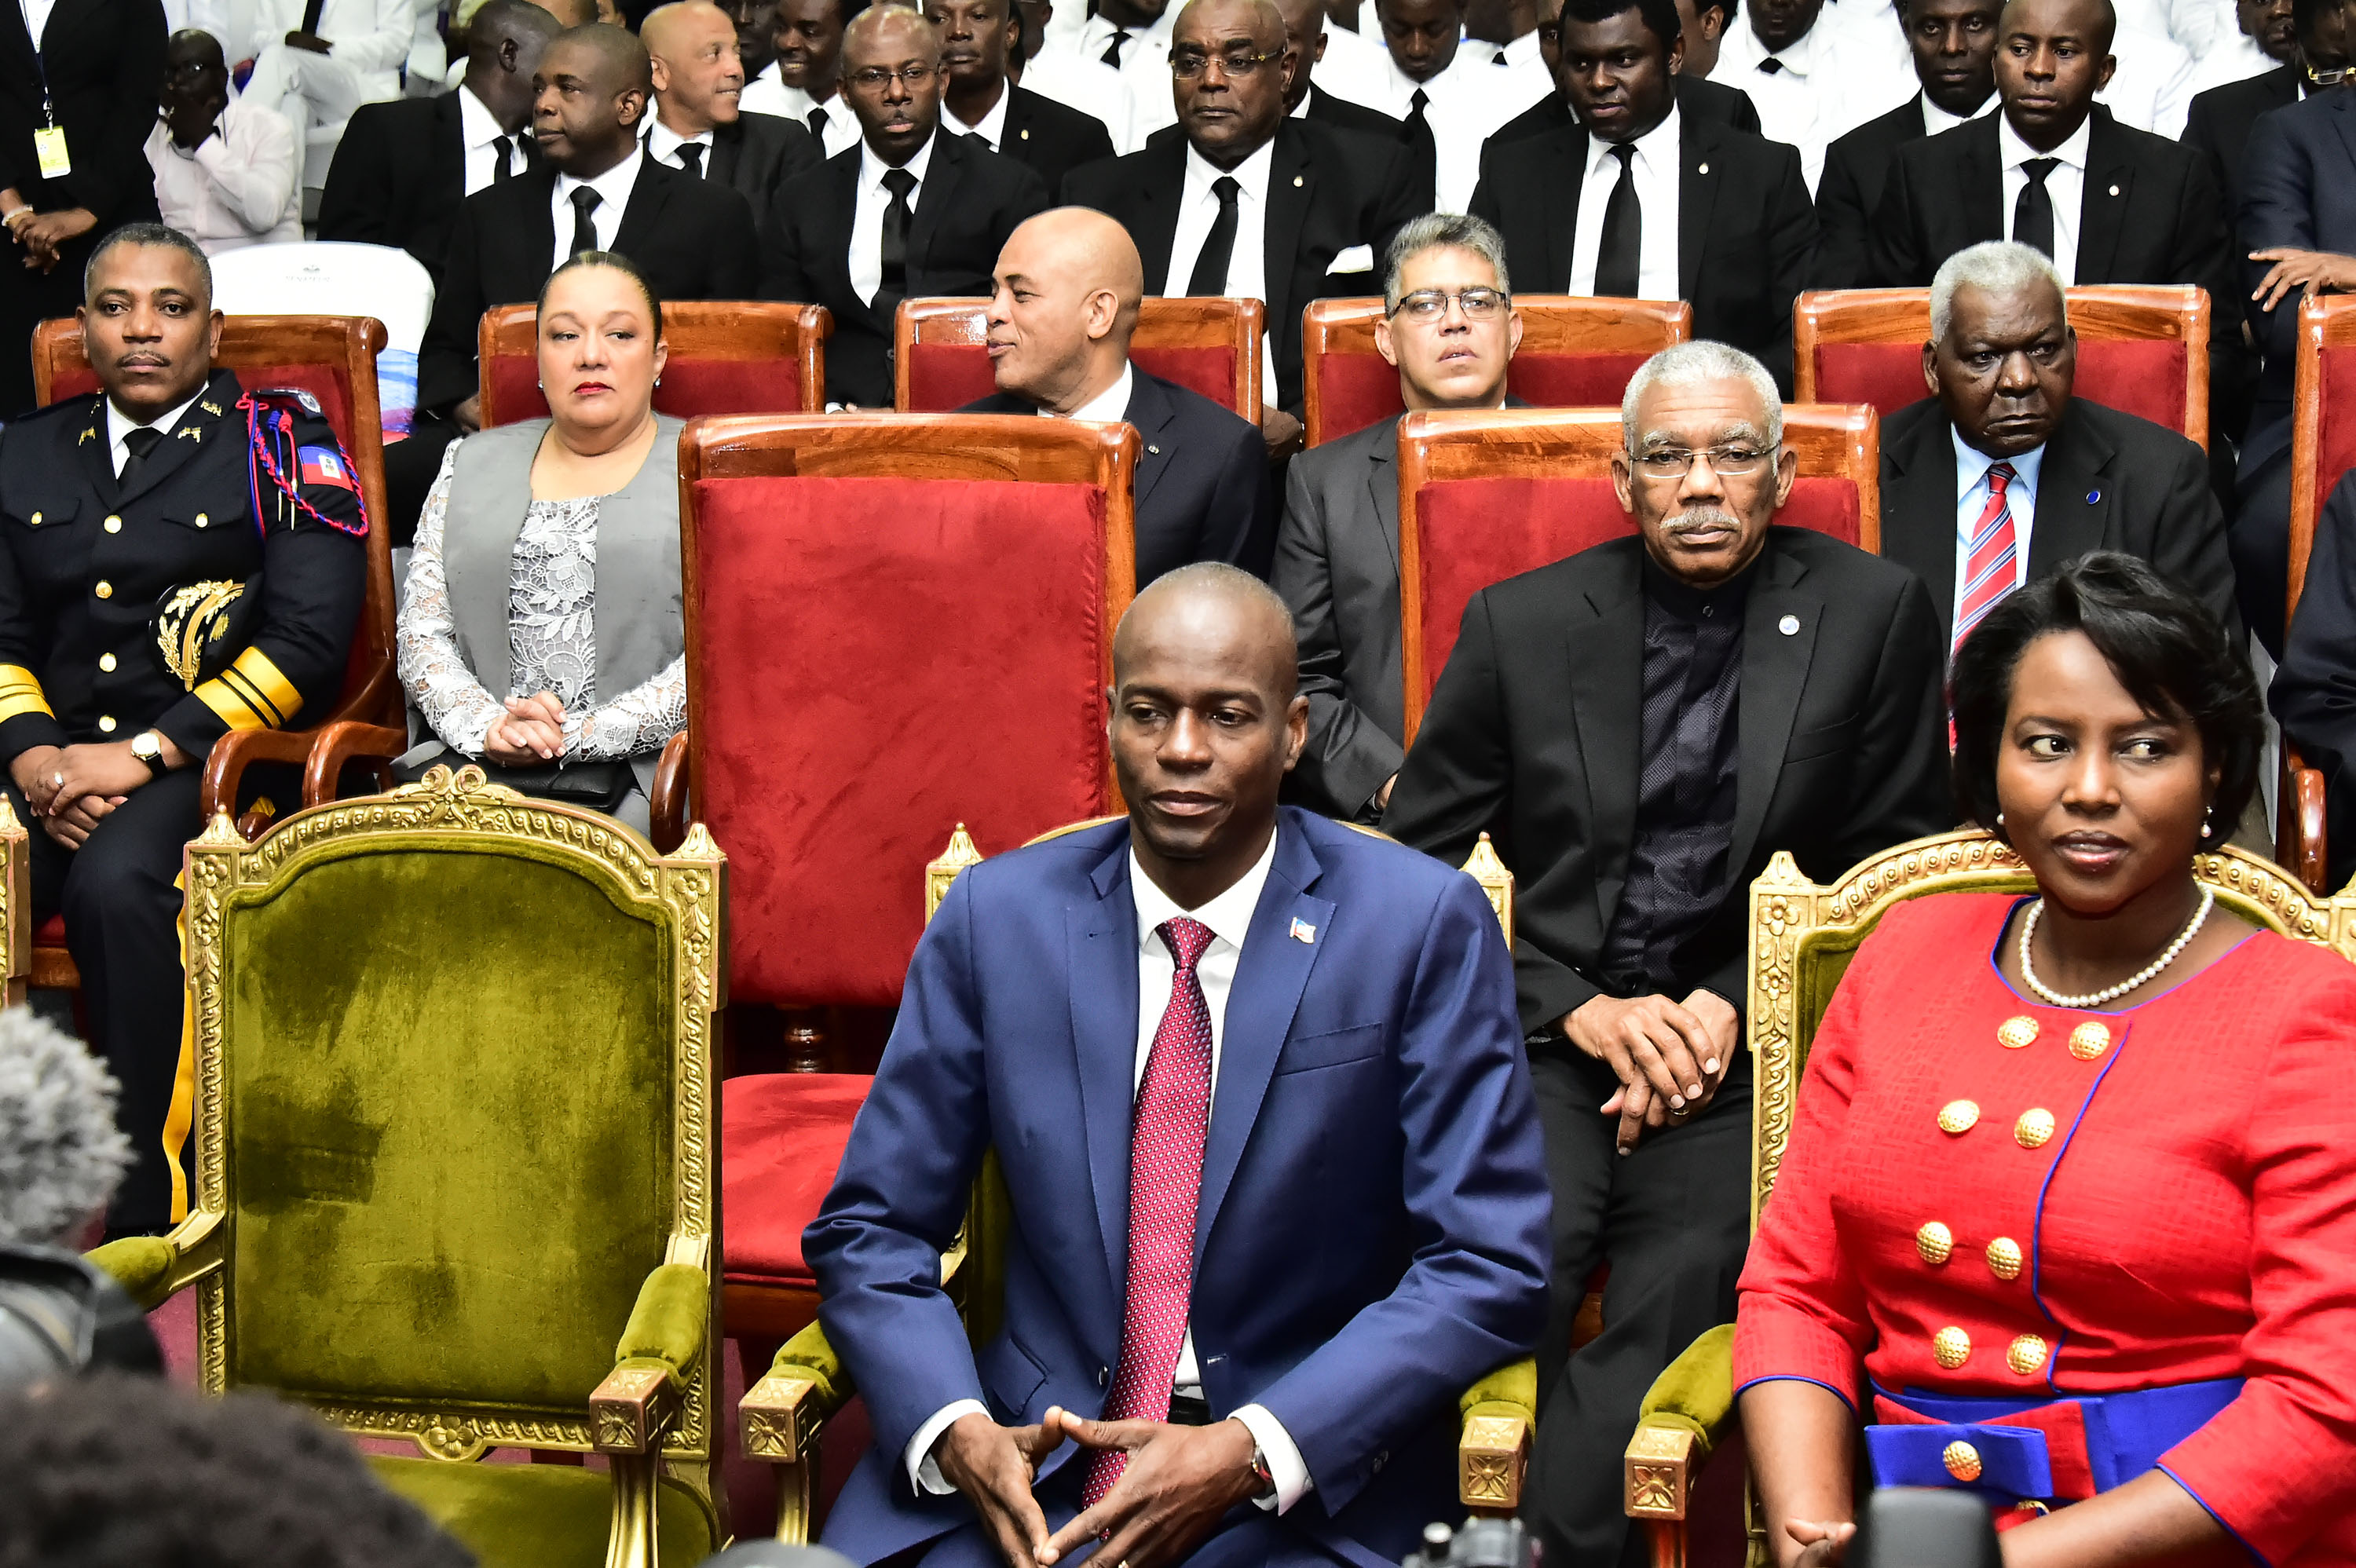 Scenes from inauguration of new Haitian President on ...